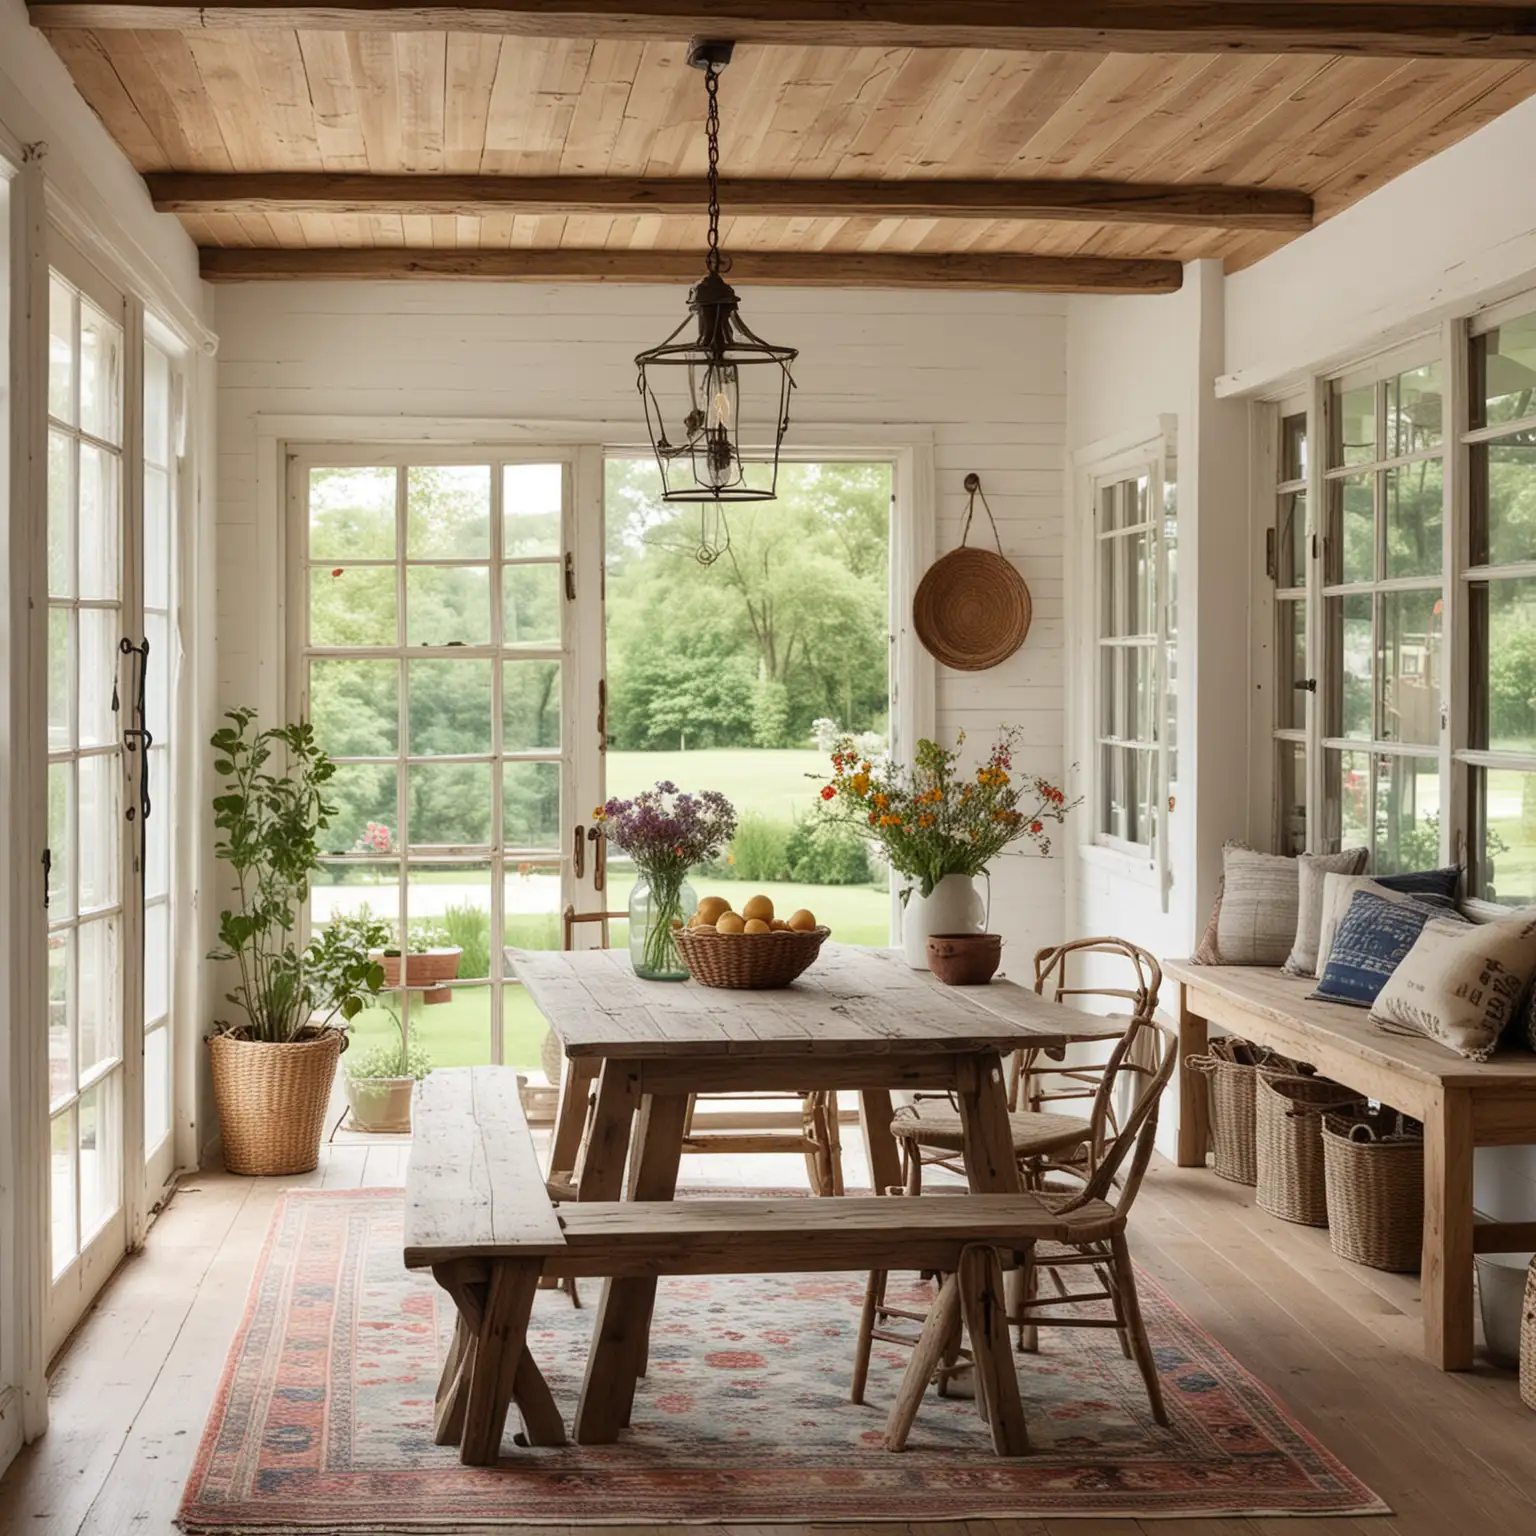 design a very wide distant shot of Rustic Farmhouse Dining Area: Wooden ceiling beams and white shiplap walls. Vintage wooden table with mismatched chairs and a bench. Wildflowers in a mason jar vase on the table. Woven basket decor on the walls and sideboards. Light wood floors with a natural fiber rug. Large window overlooking a garden, bringing in natural light.